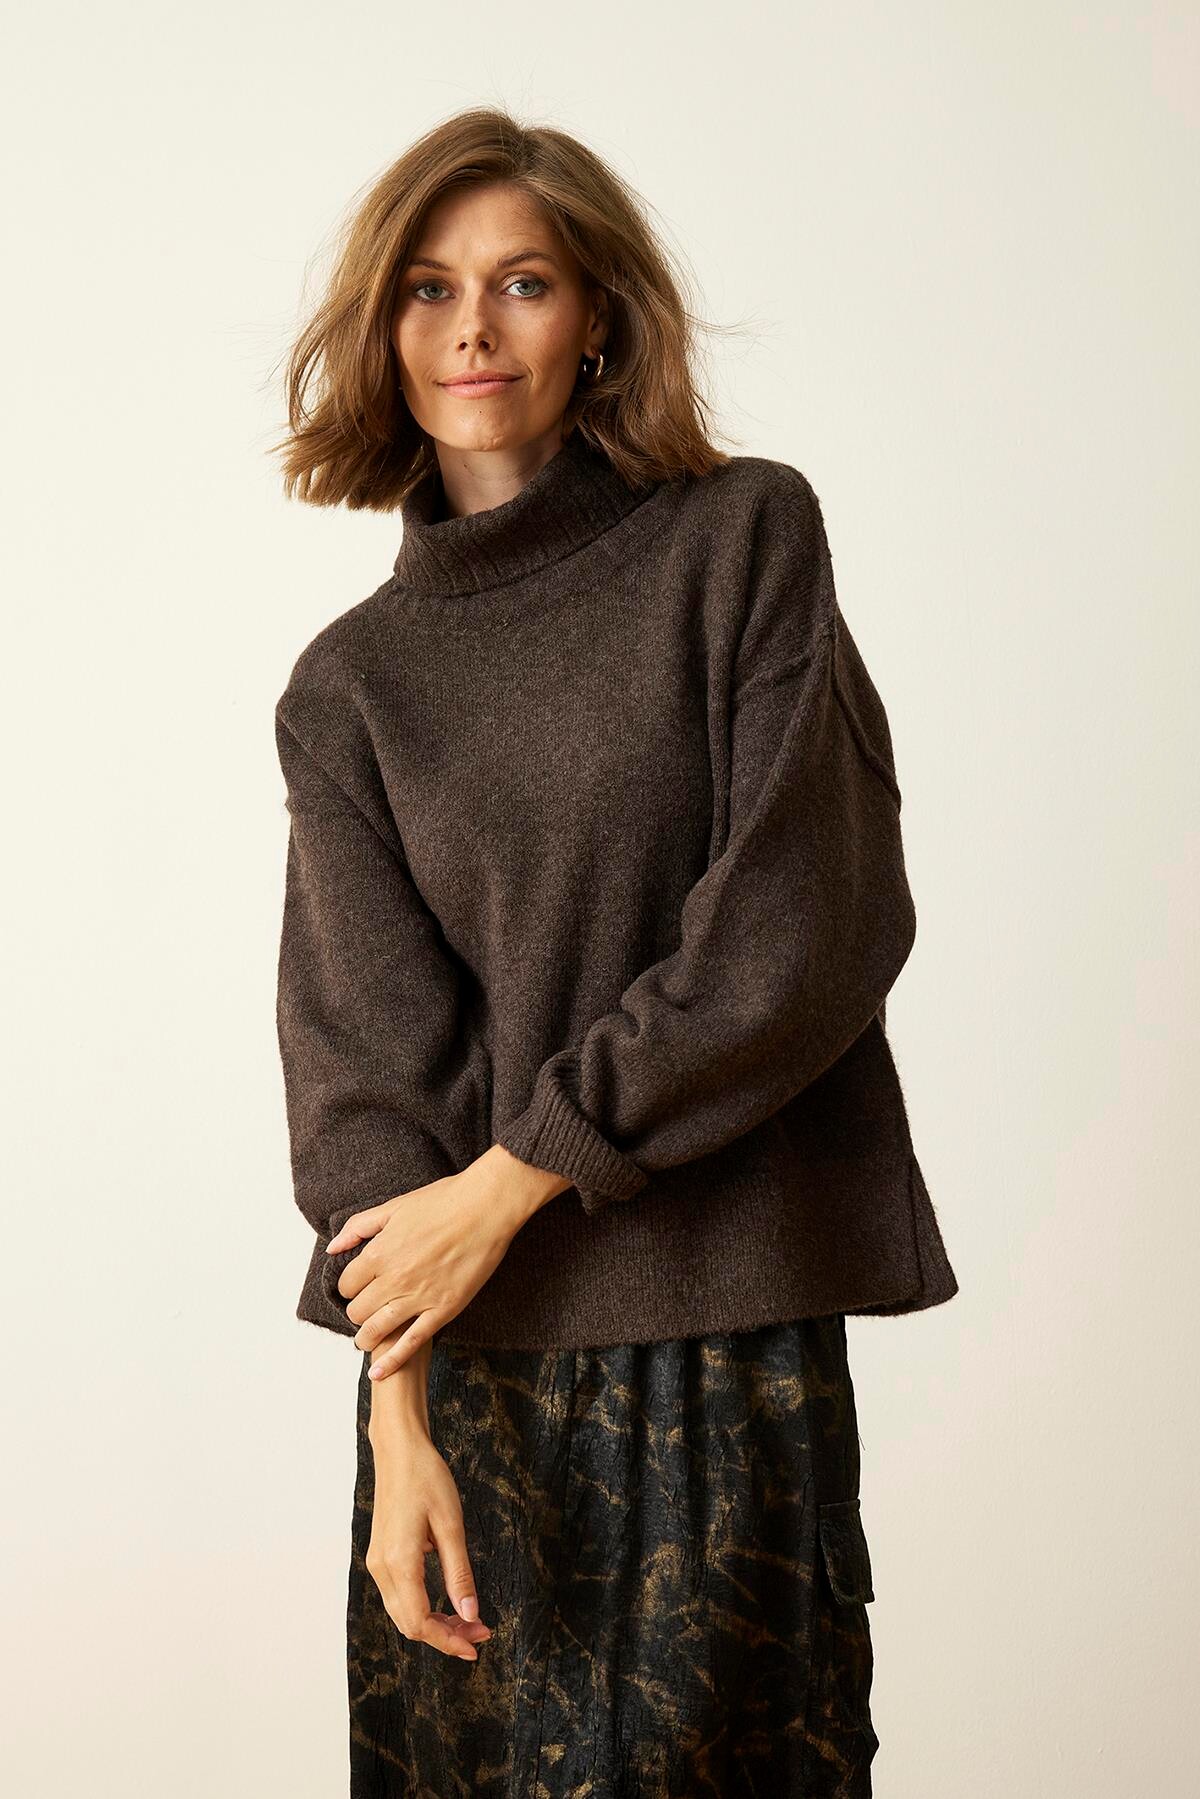 IN FRONT LOULOU SWEATER 15950 890 (Dark Brown 890)